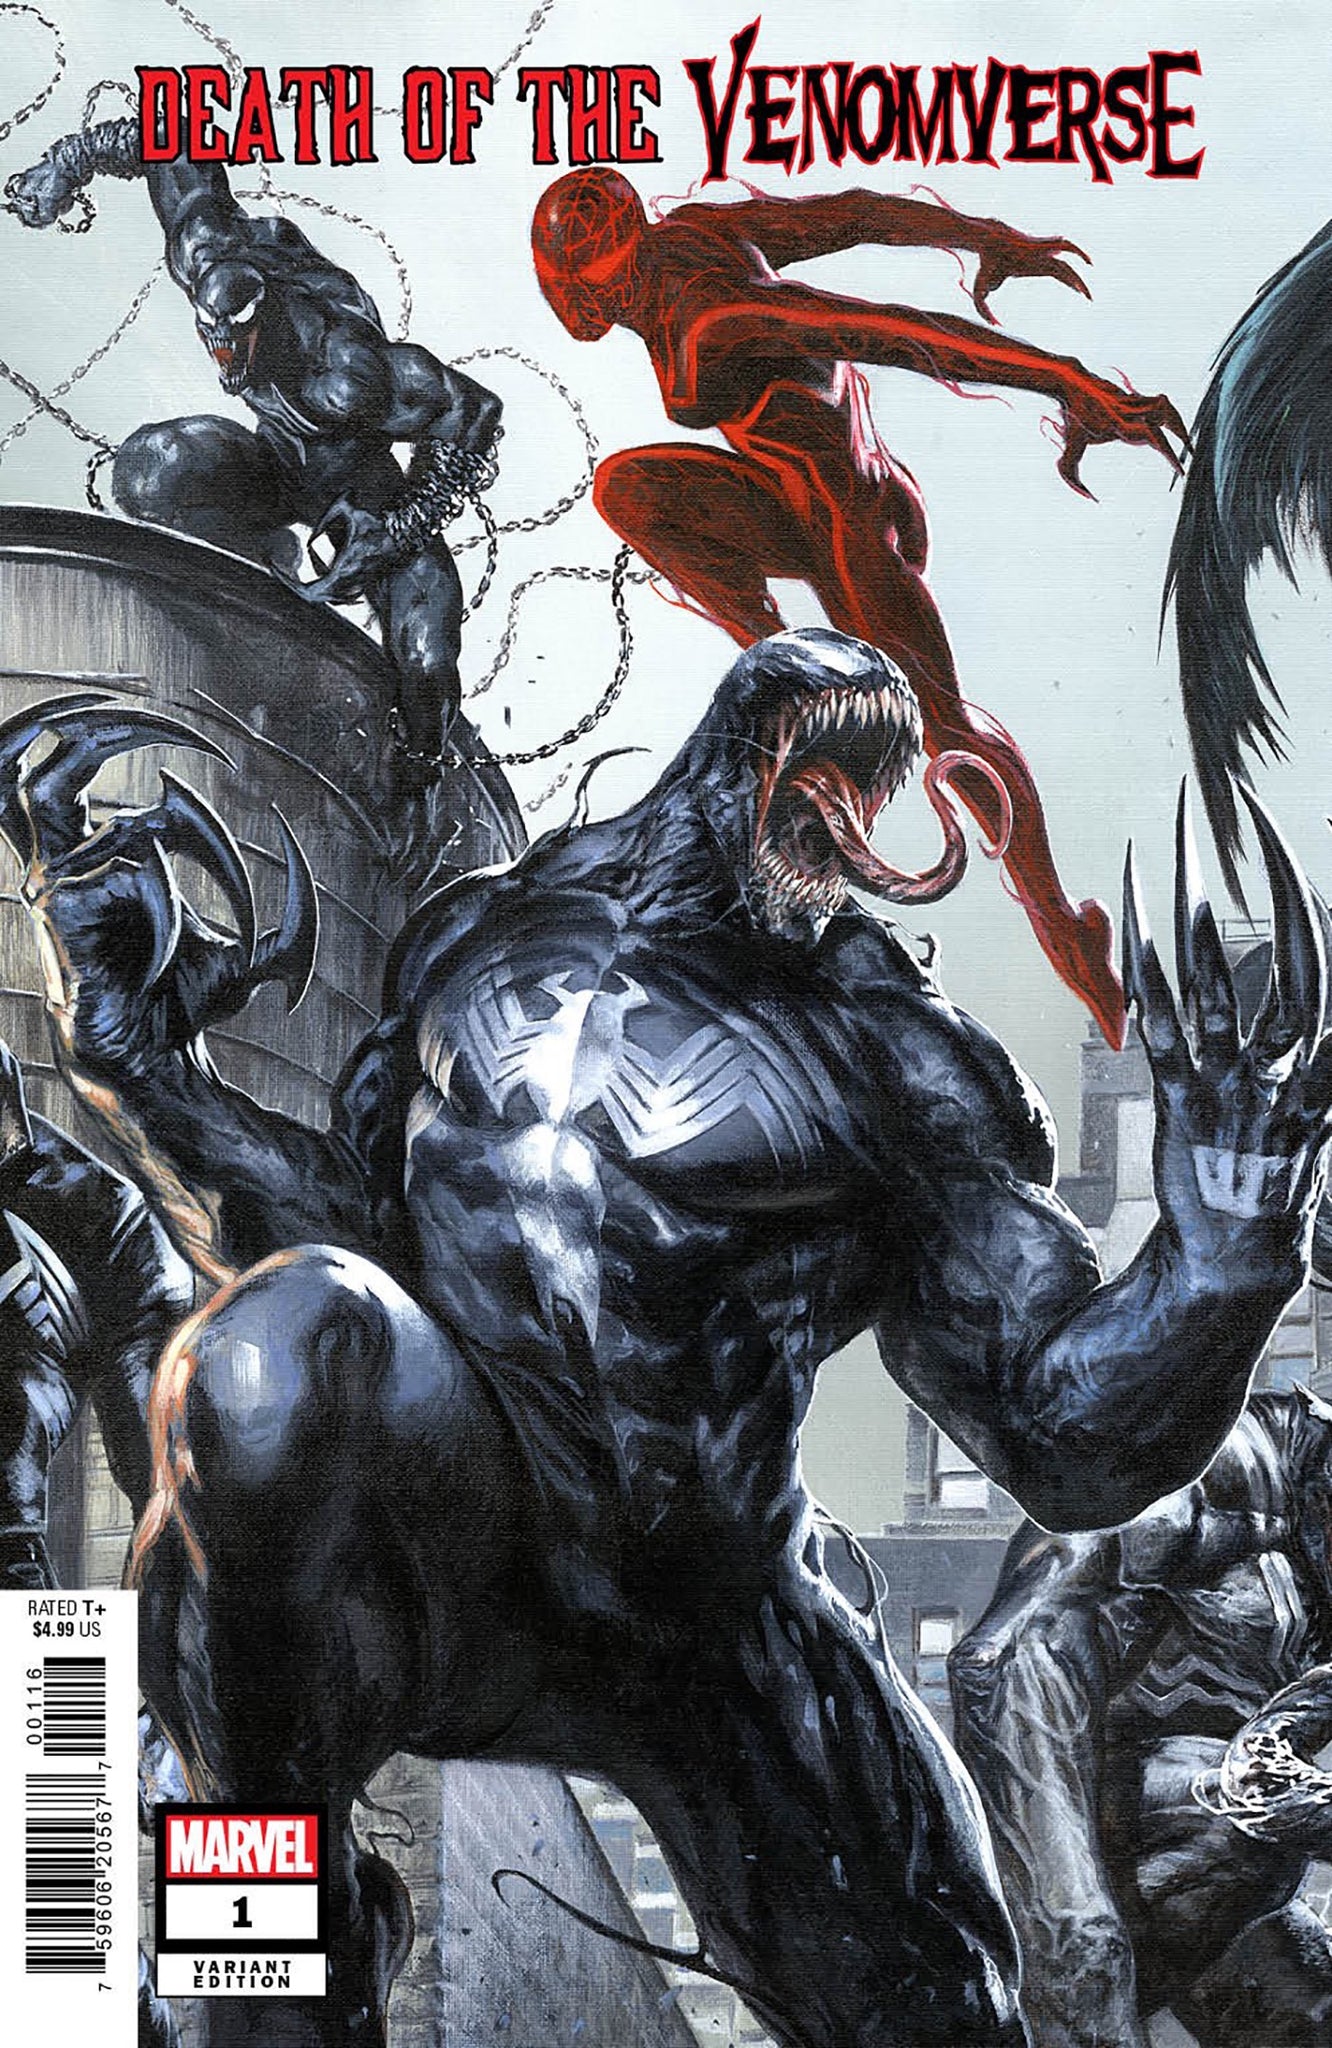 DEATH OF VENOMVERSE #1 GABRIELE DELL’OTTO 1:10 Connecting Ratio Variant